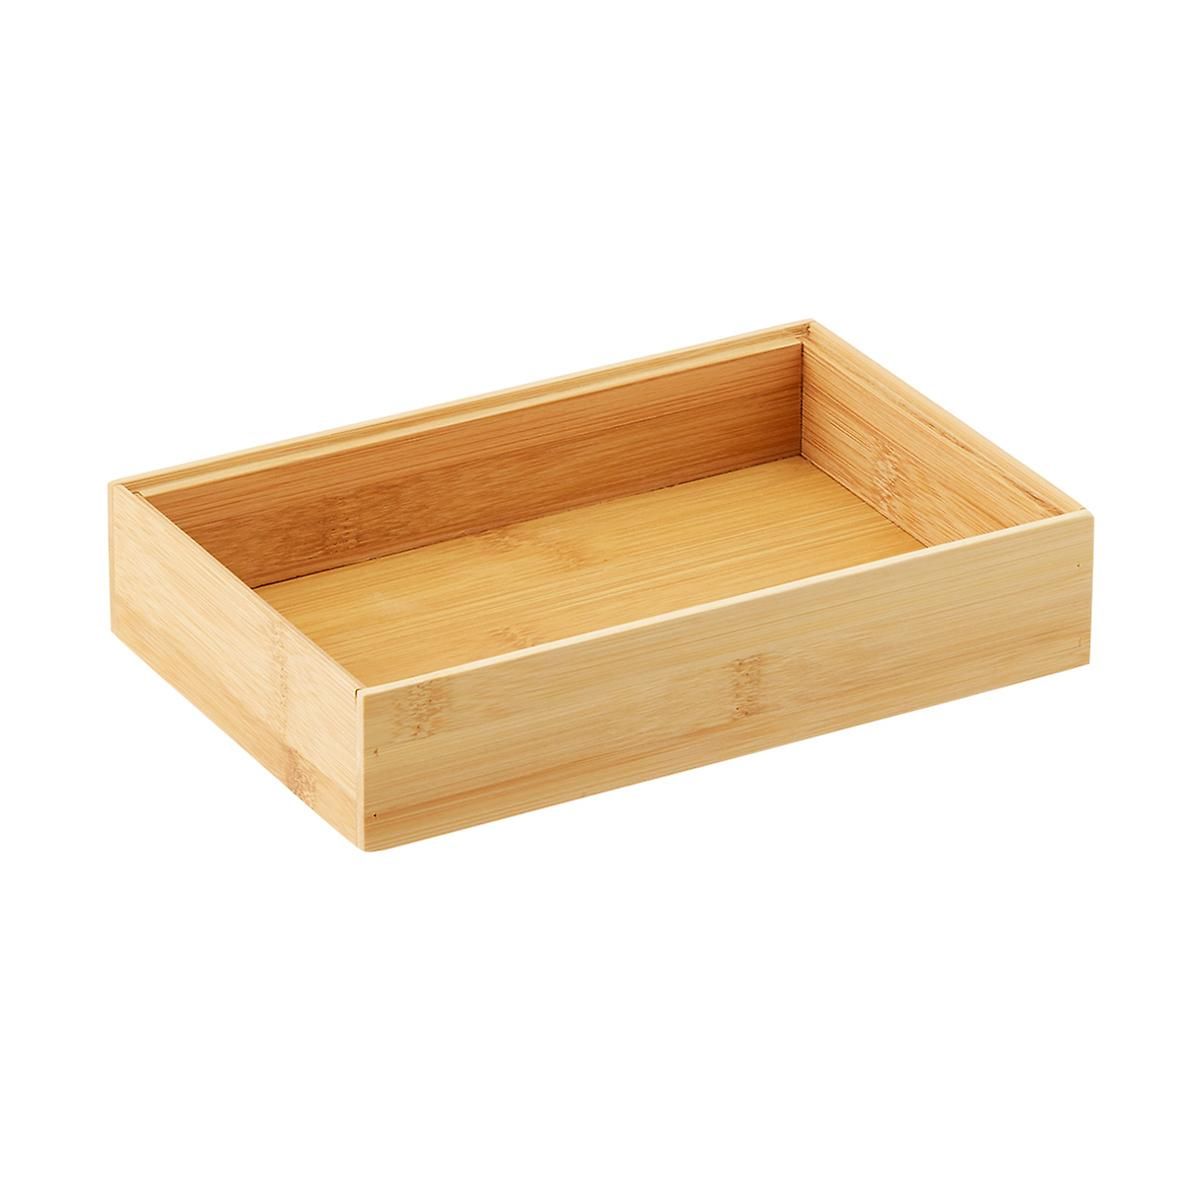 Bamboo Stacking Drawer Organizer | The Container Store